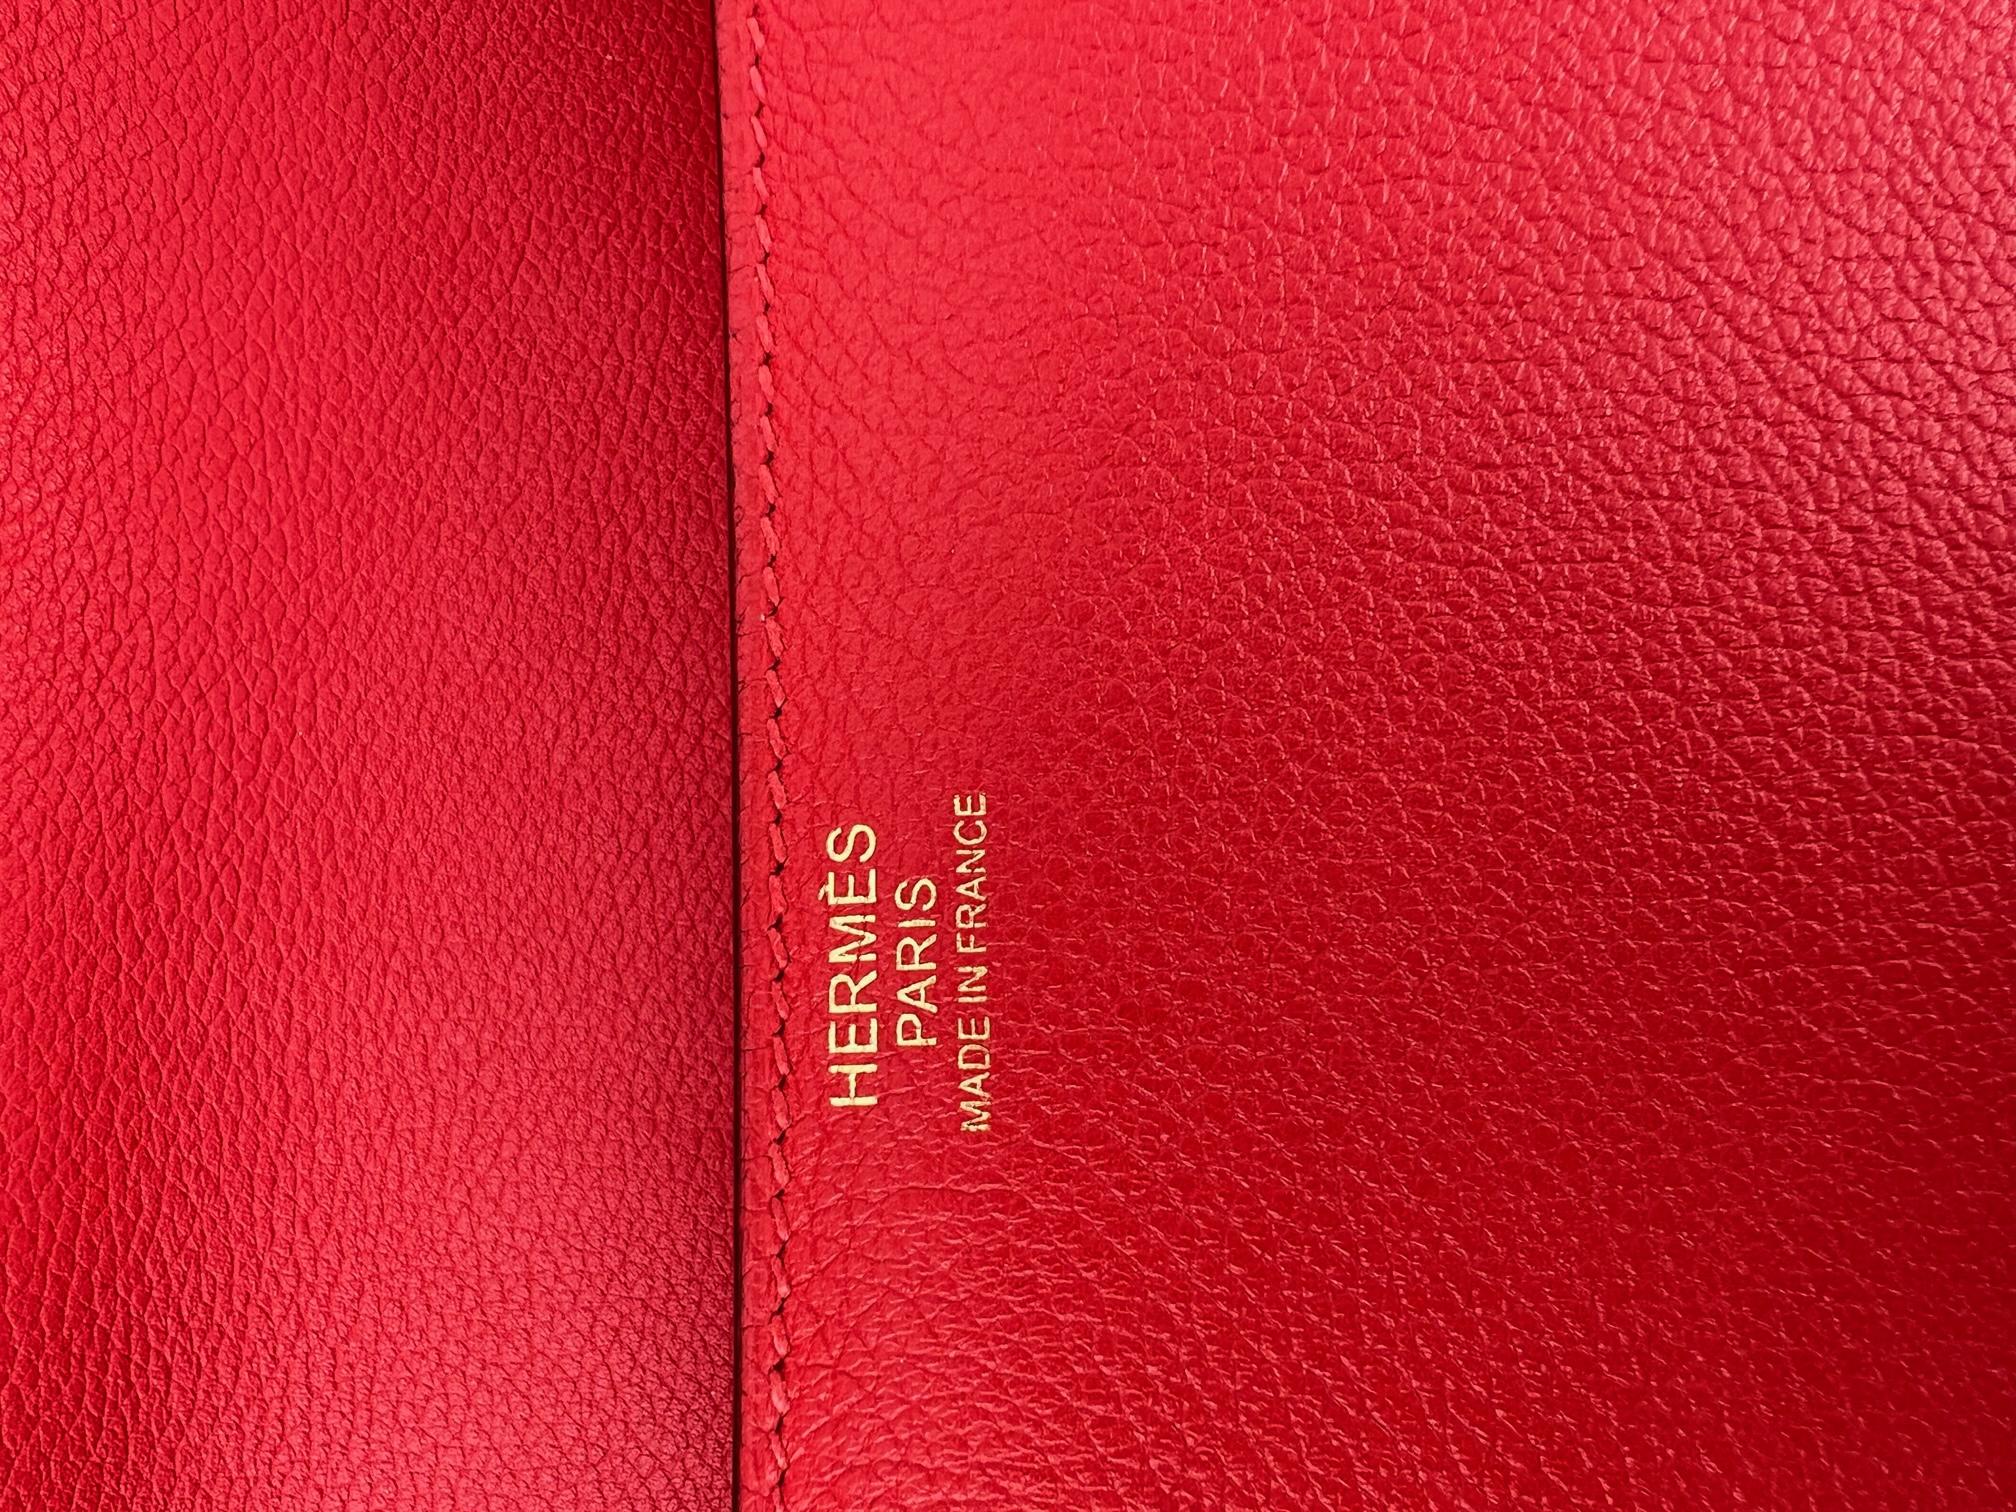 Pre-Owned  100% Authentic
Hermes Evercolor Cherche Midi 25 Rouge Tomato
Use as Shoulder, Crosbody, Hand or Clutch Bag 
RATING: A/B...Very Good, well maintained, 
shows minor signs of wear
MATERIAL: leather
STRAP: adjustable, 2 different lengths,